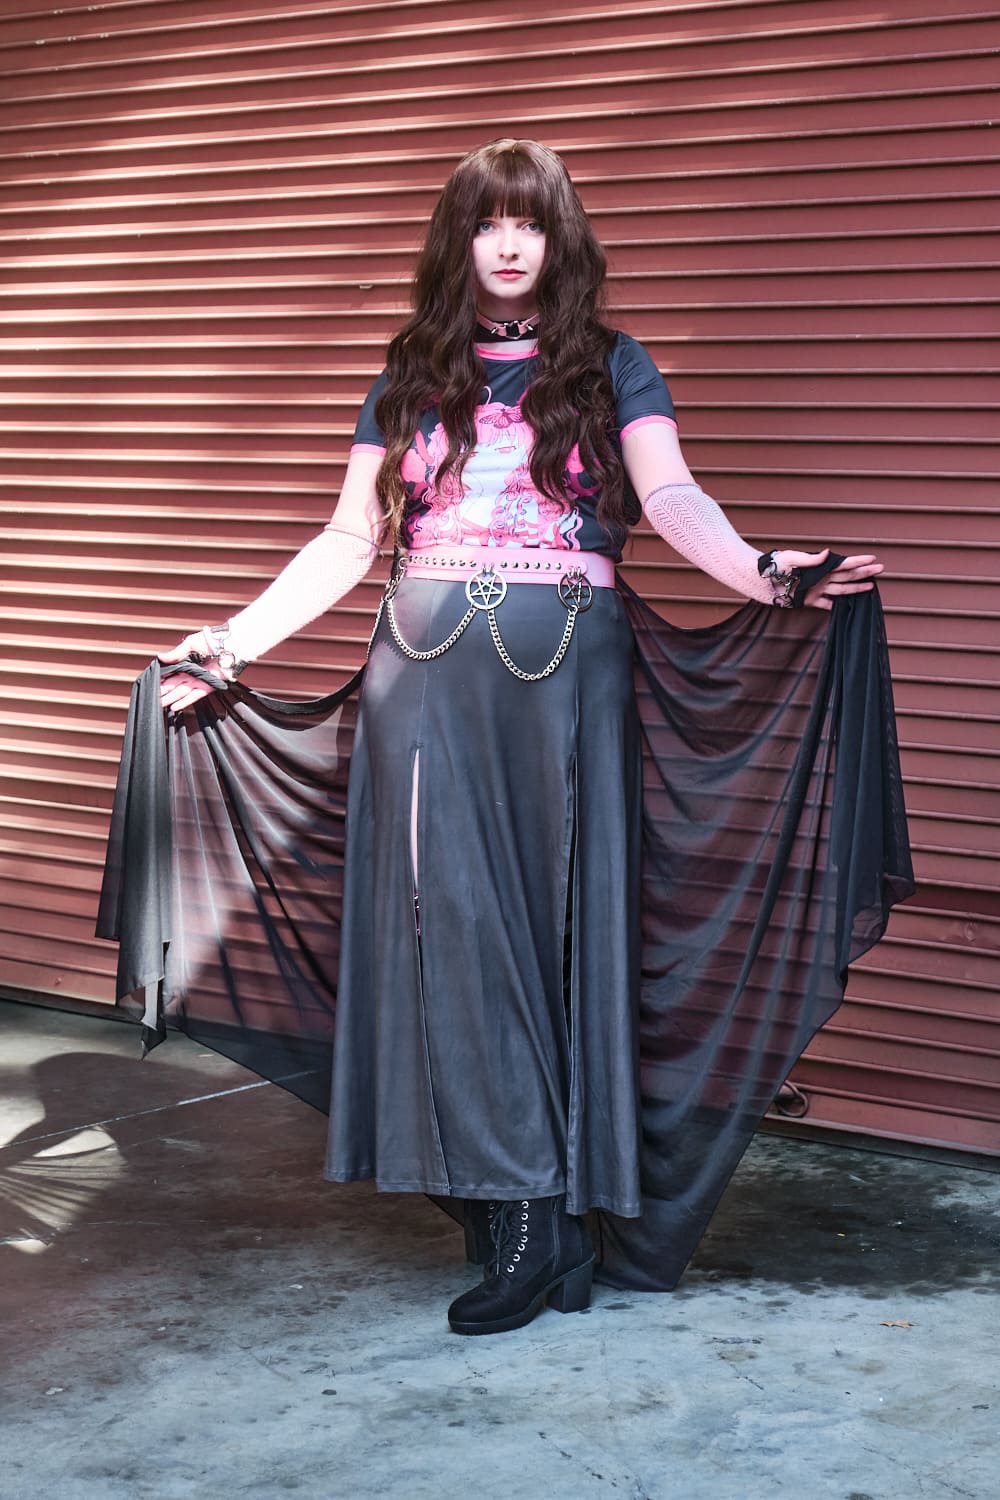 Gothic model wearing black and pink printed T-shirt and slit skirt with pink chain belt - full body pose 2.